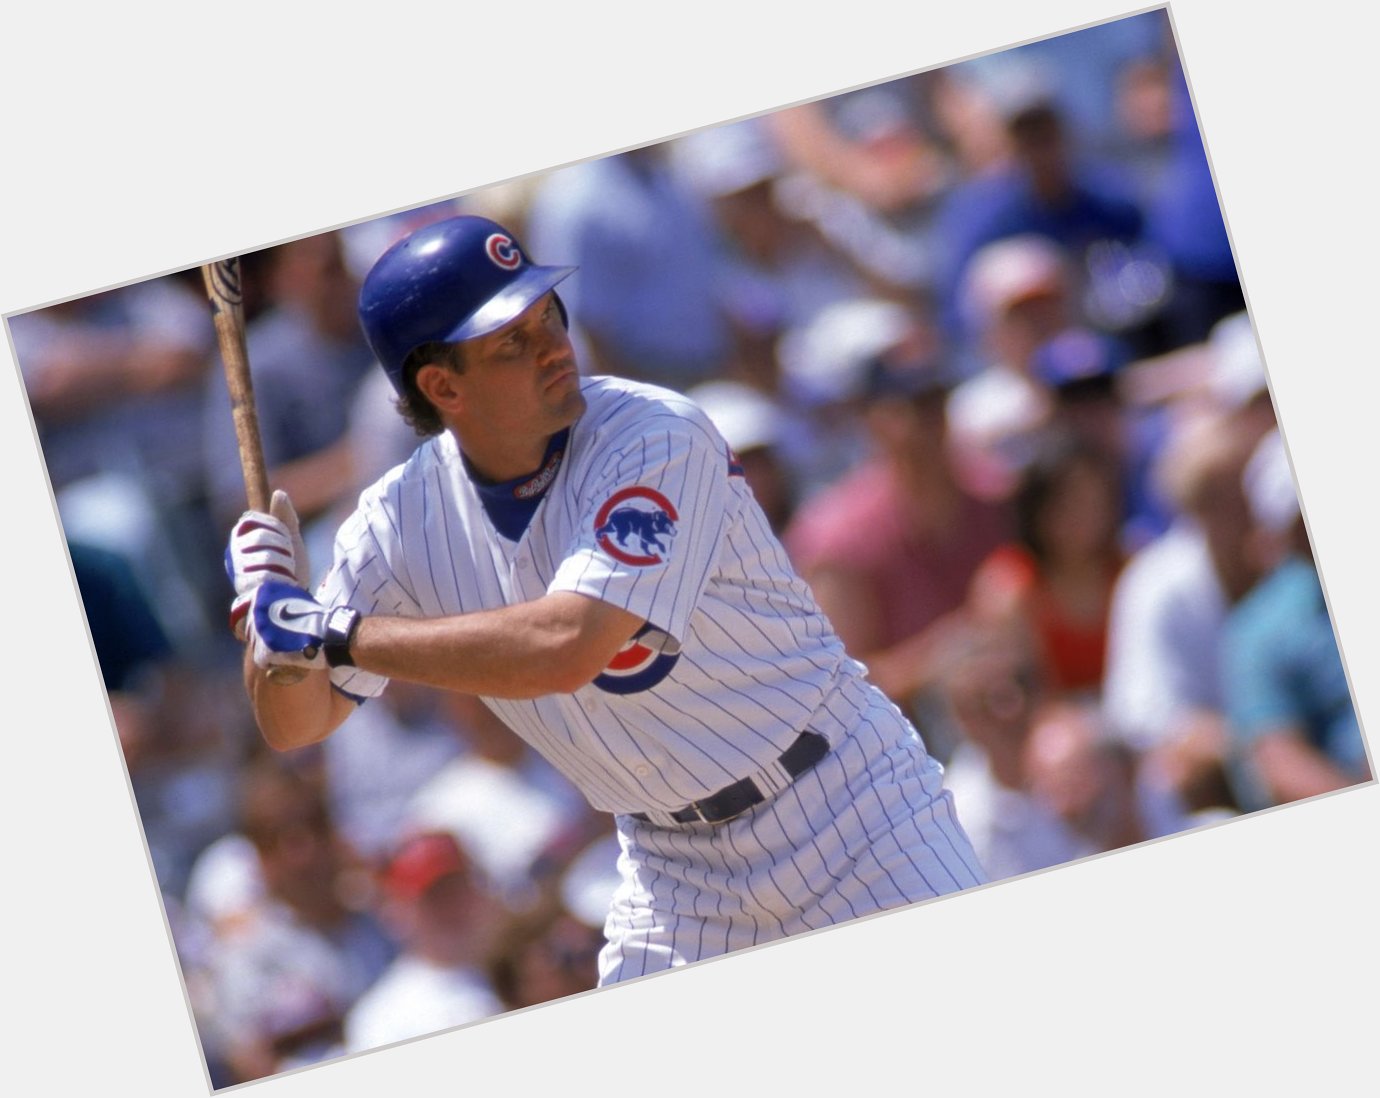 Happy 58th Birthday to former middle infielder and Hall of Famer, Ryne Sandberg!  